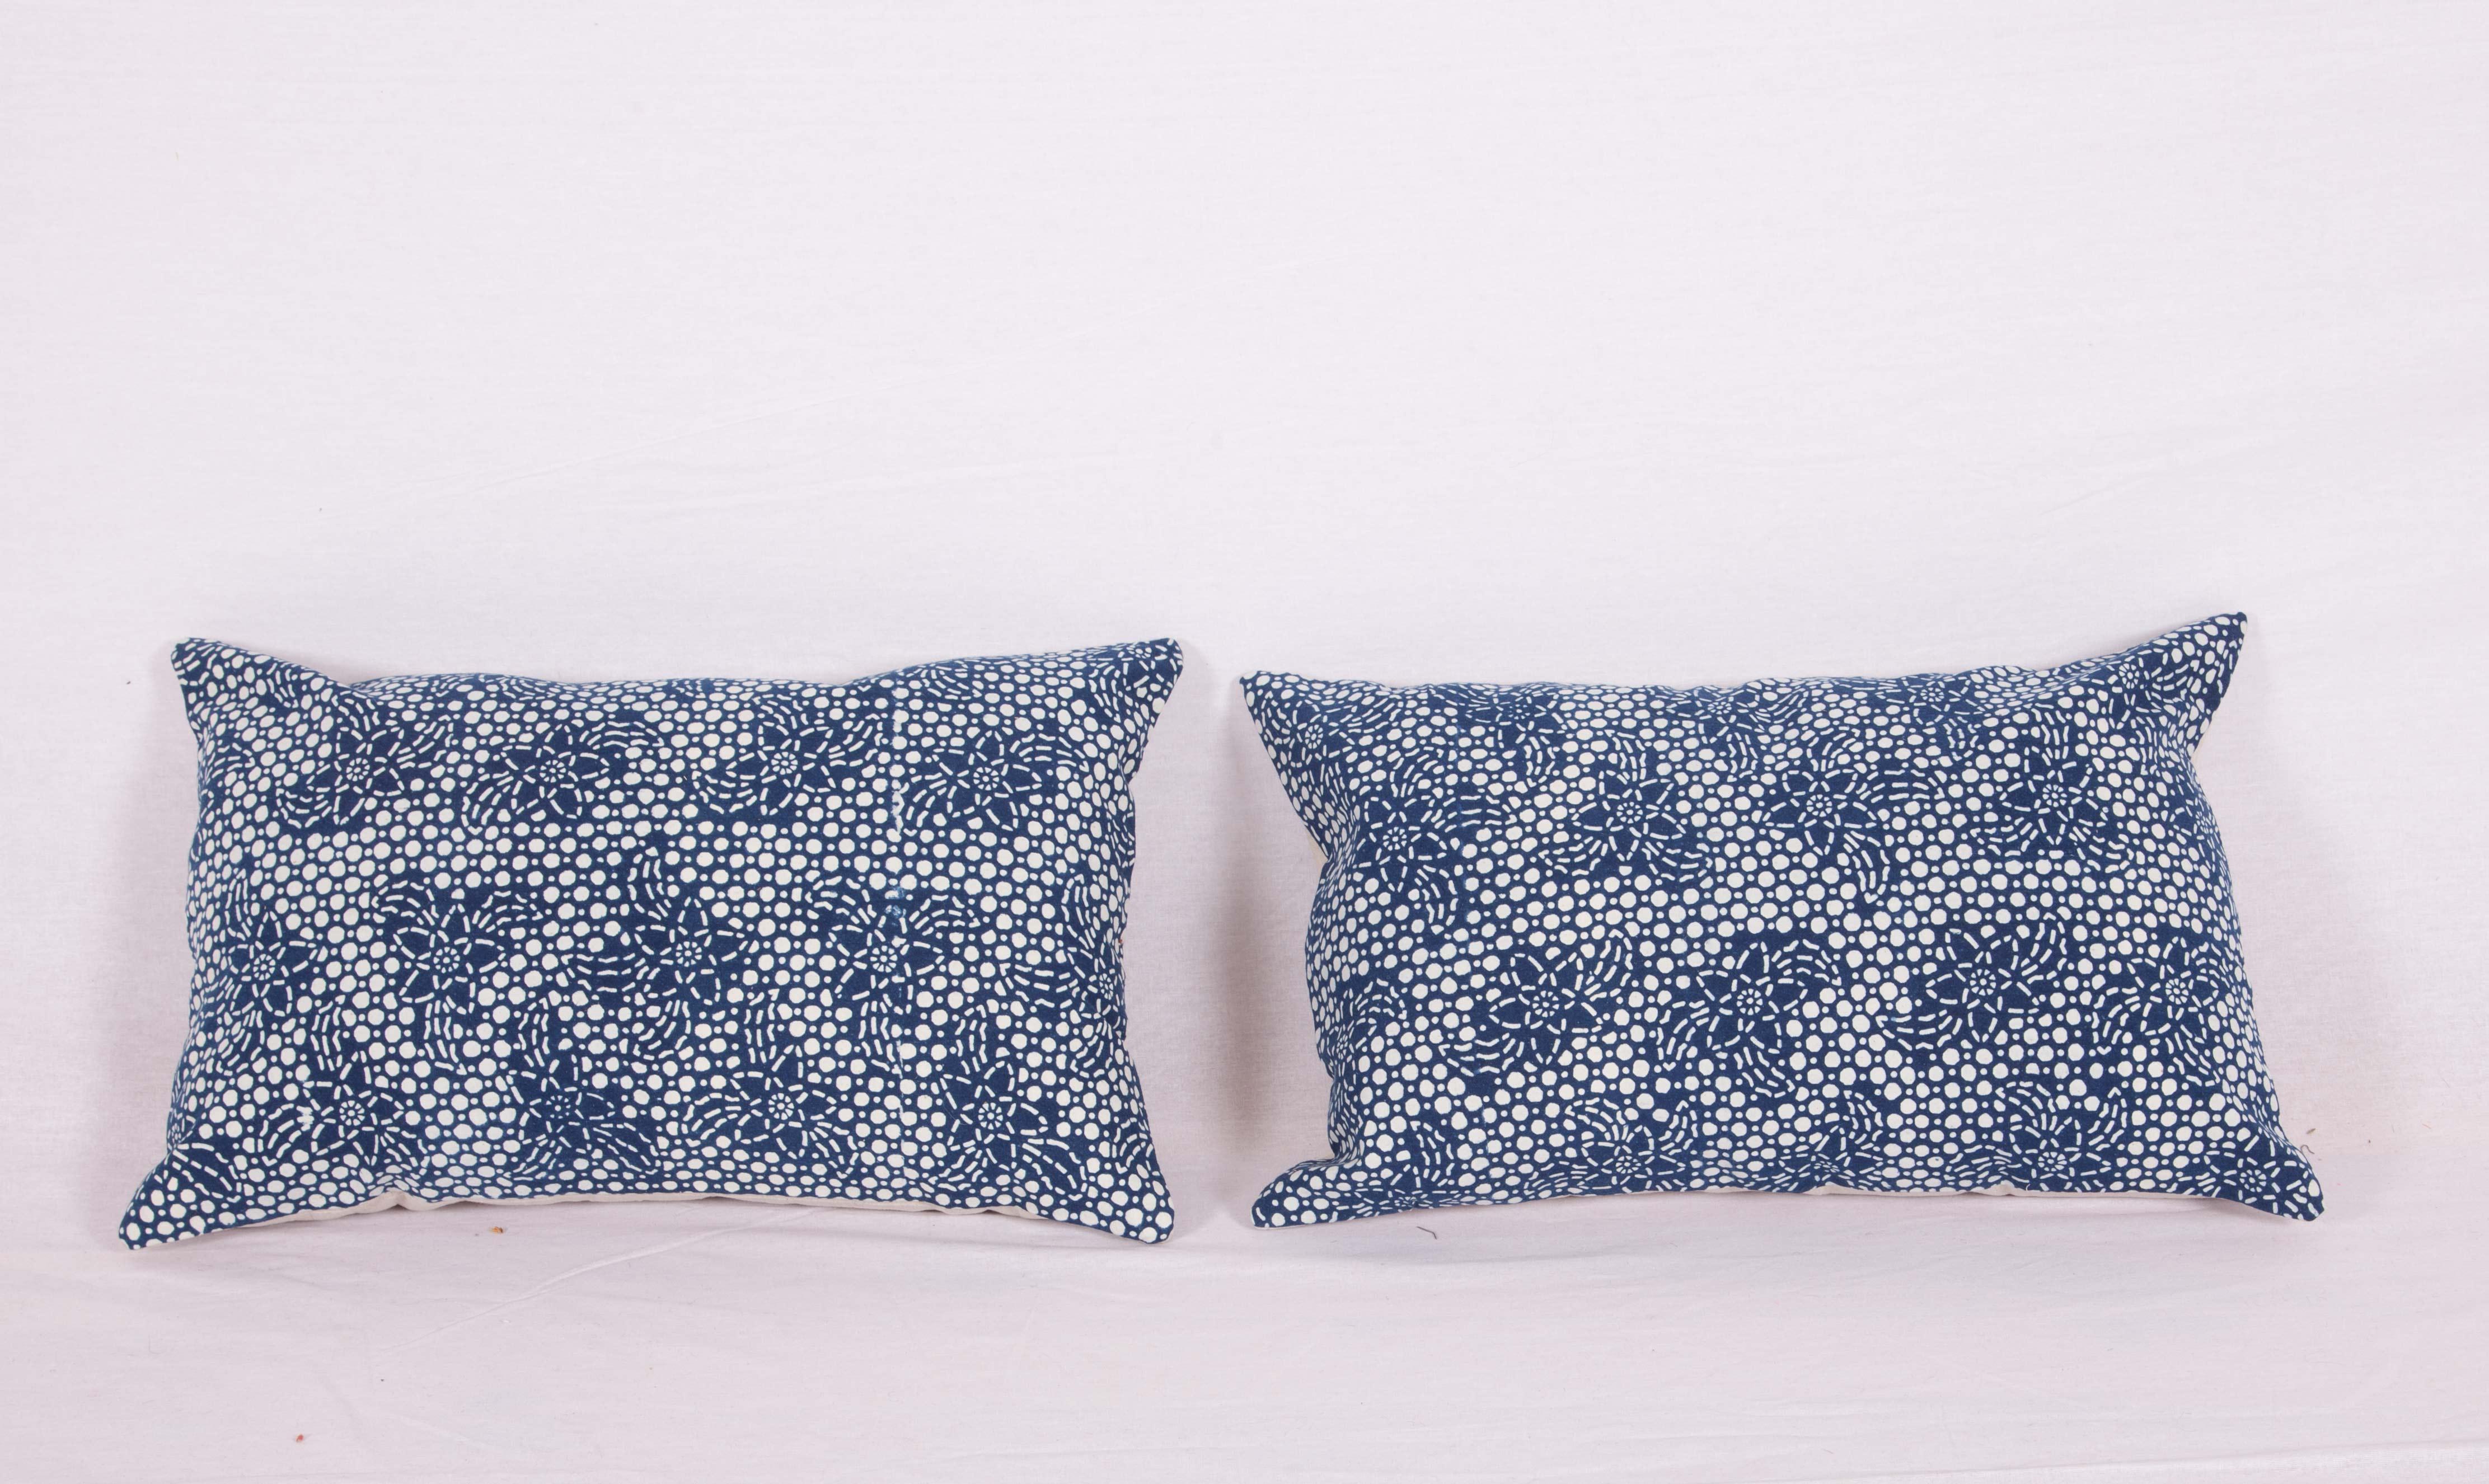 The pillows are made from a contemporary indigo, Miao textile. They do not come with inserts but come with bags made to the size and out of cotton to accommodate the filling. The backing is made of linen. Please note filling is not provided. Since